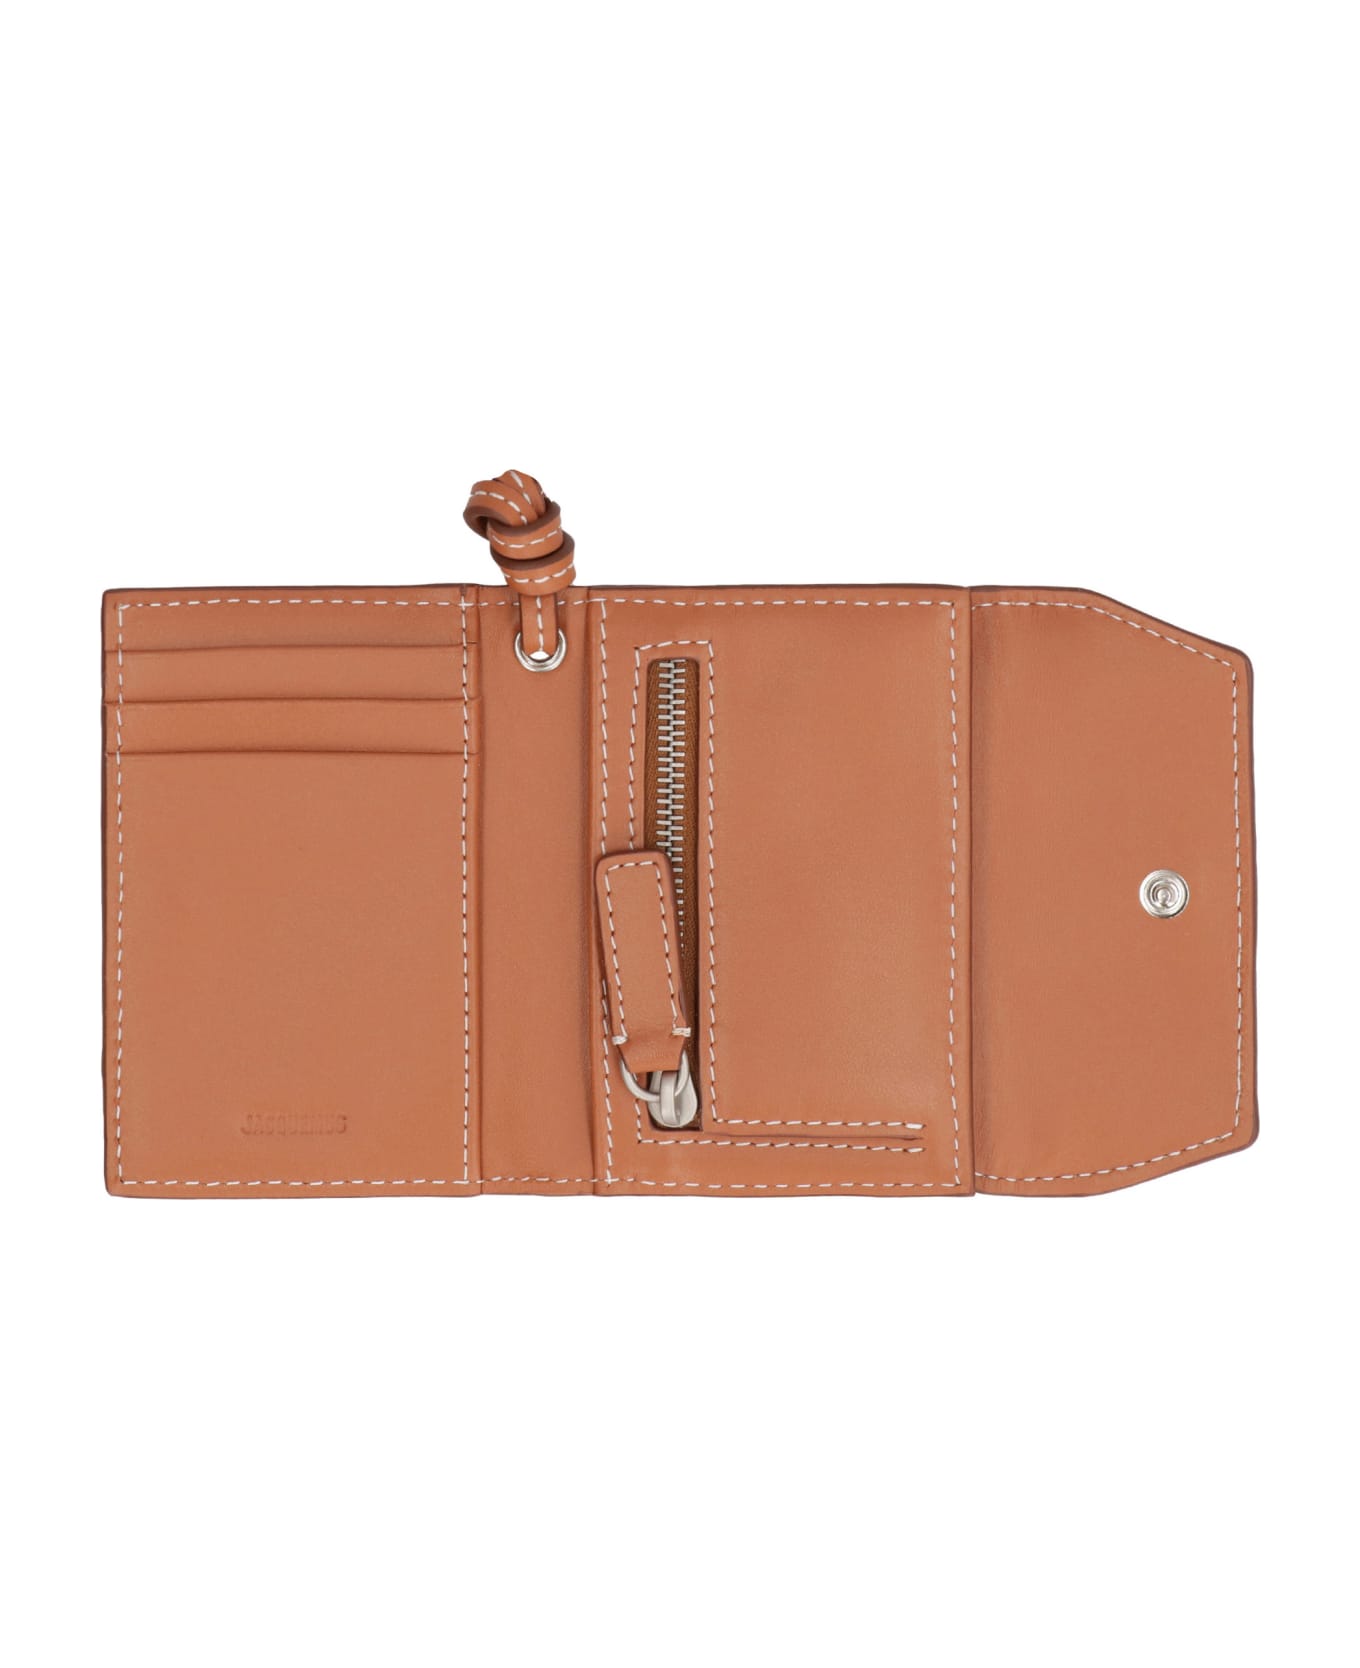 Jacquemus Leather Wallet With Strap - Saddle Brown